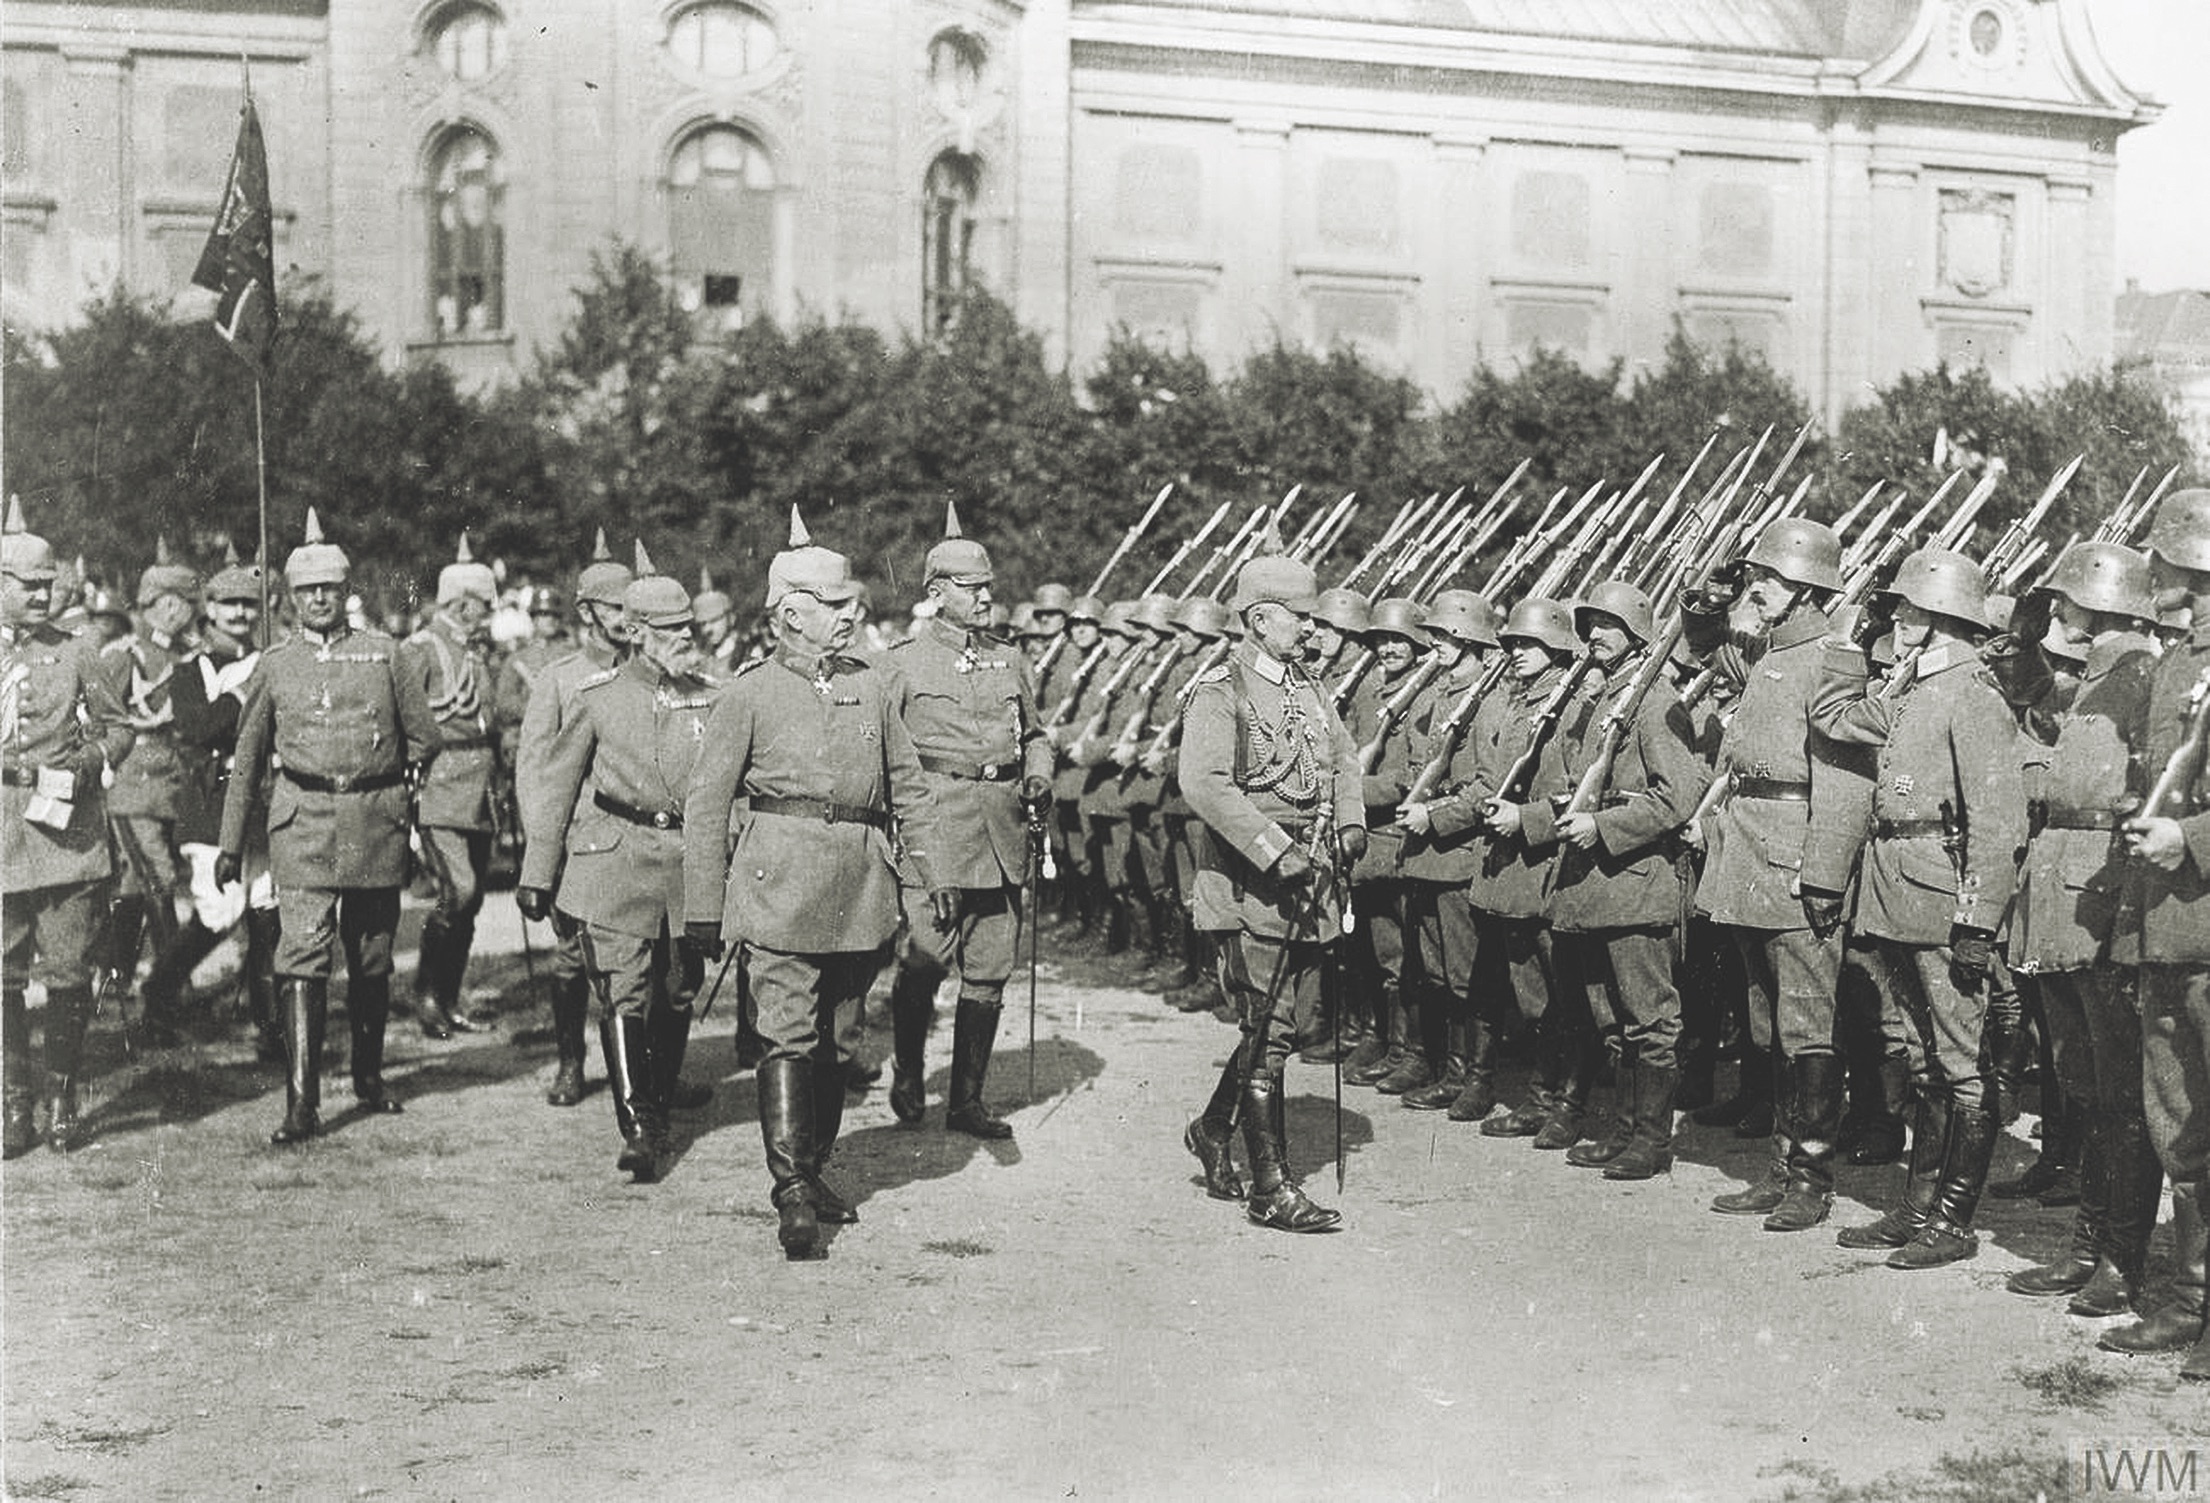 A bearded Prince Leopold of Bavaria, supreme commander of German forces on the Eastern Front, accompanies Kaiser Wilhelm II (center) on a review of troops following the capture of Riga. (PVE/Alamy Stock Photo)